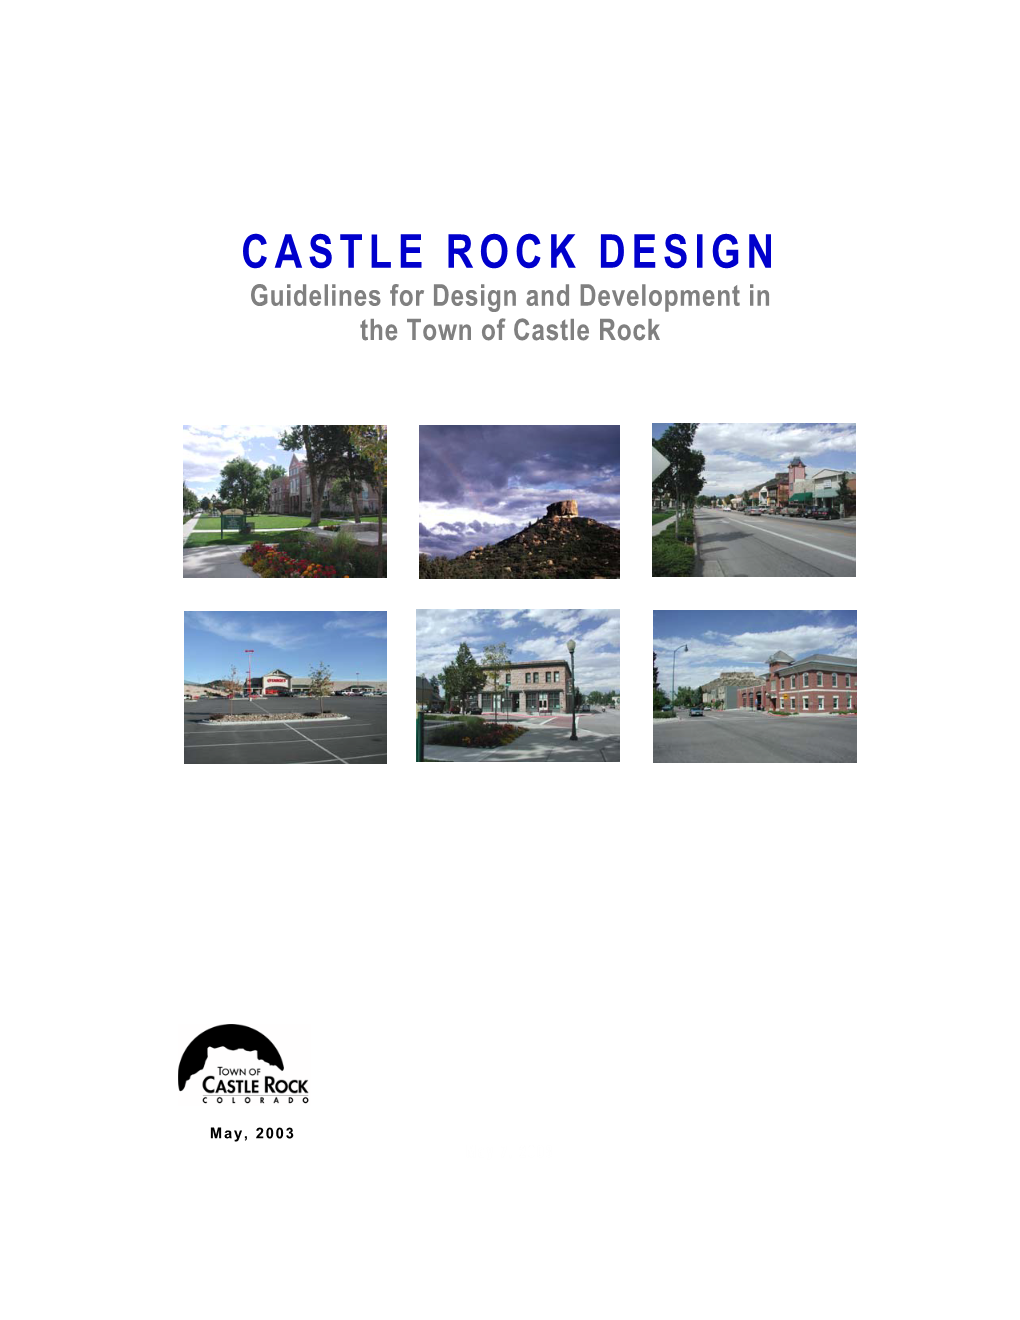 CASTLE ROCK DESIGN Guidelines for Design and Development in the Town of Castle Rock